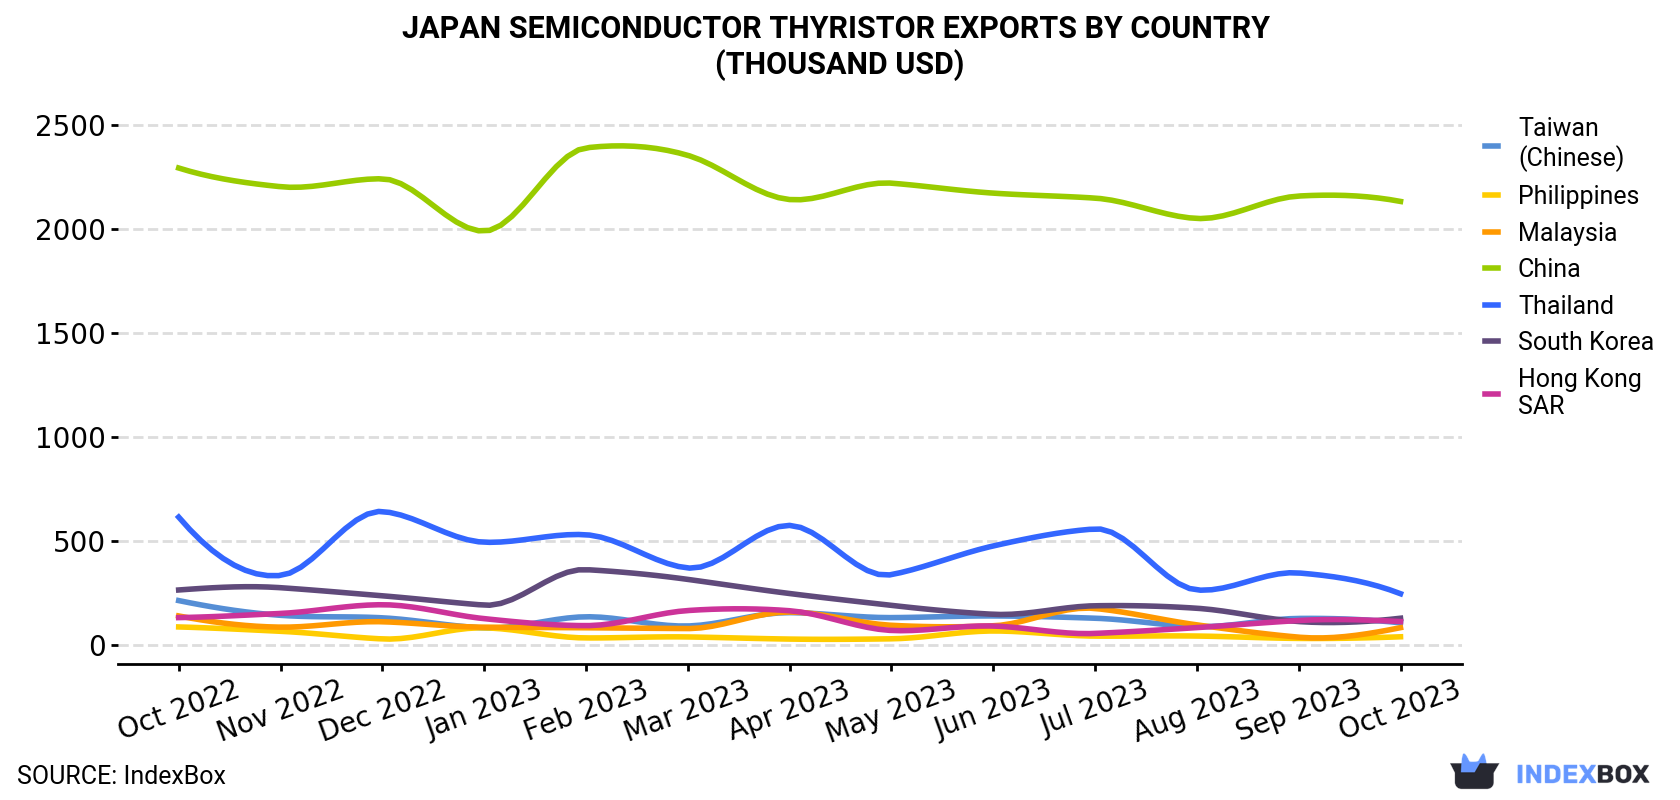 Japan Semiconductor Thyristor Exports By Country (Thousand USD)